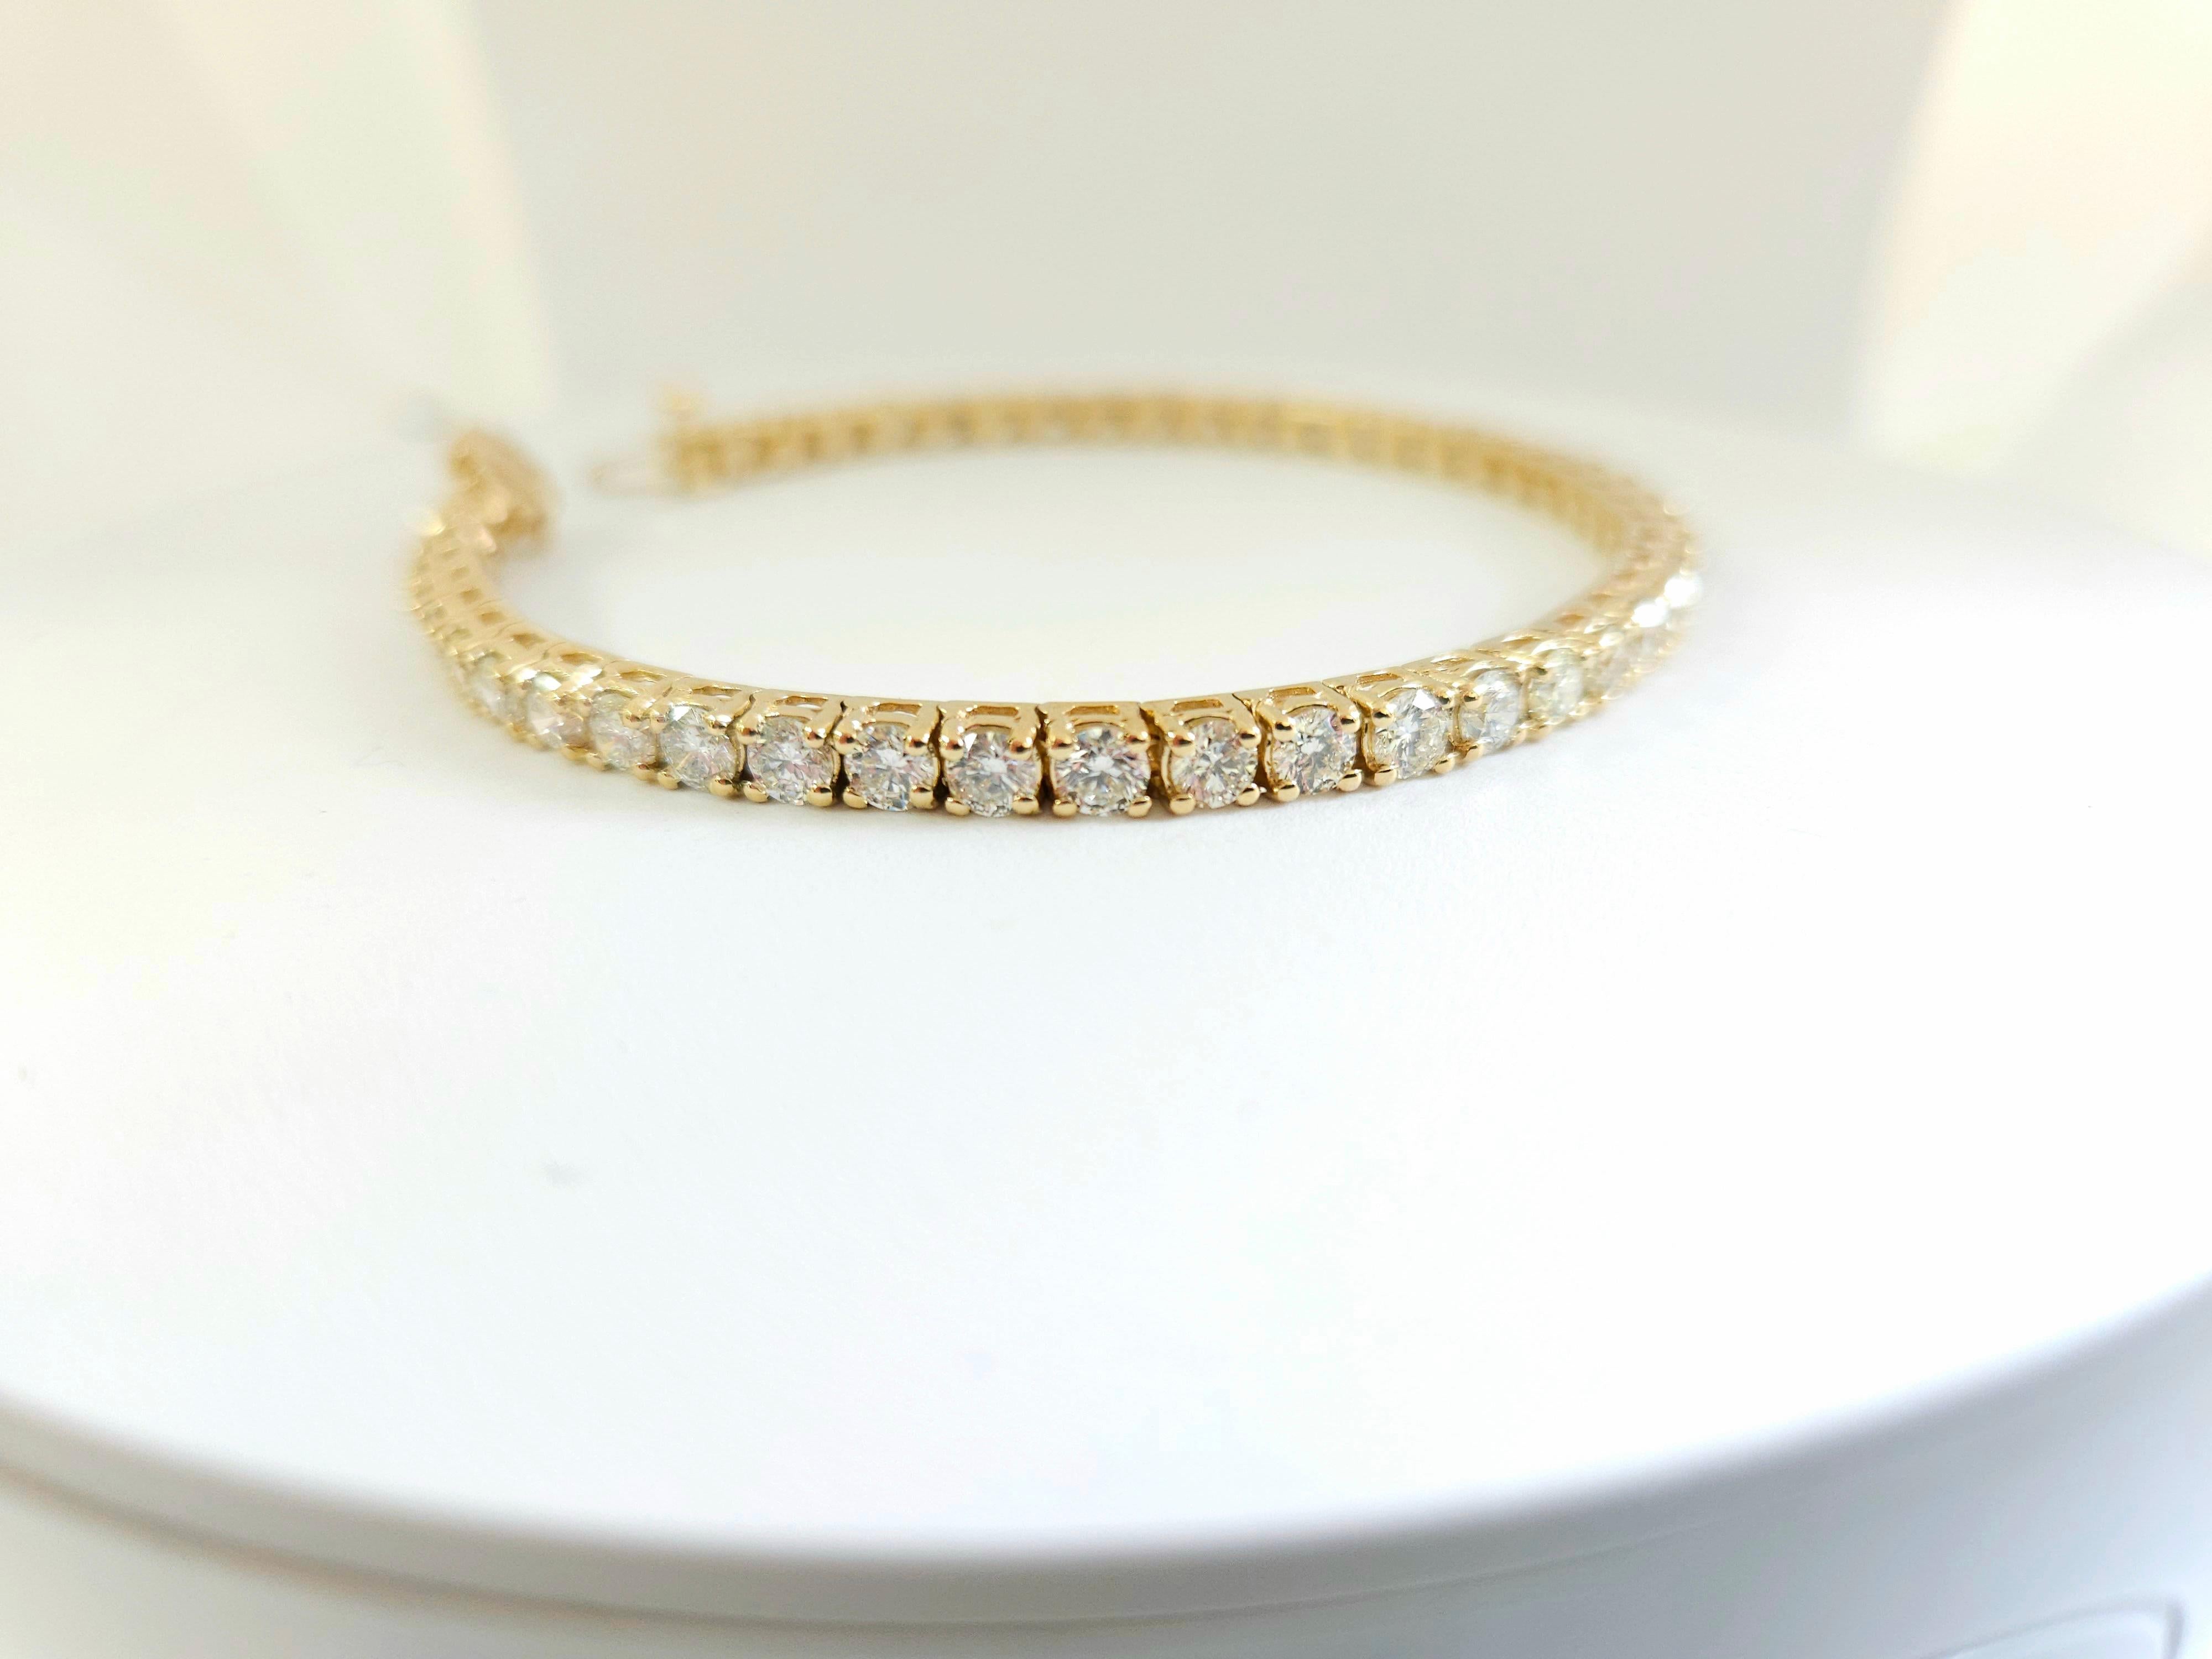 Natural diamonds tennis bracelet round-brilliant cut  14k yellow gold. 
7 inch. Average Color I, Clarity VVS,VS, 3.60 mm wide,30 pcs, 13.24 grams very shiny don't miss.

*Free shipping within U.S*

